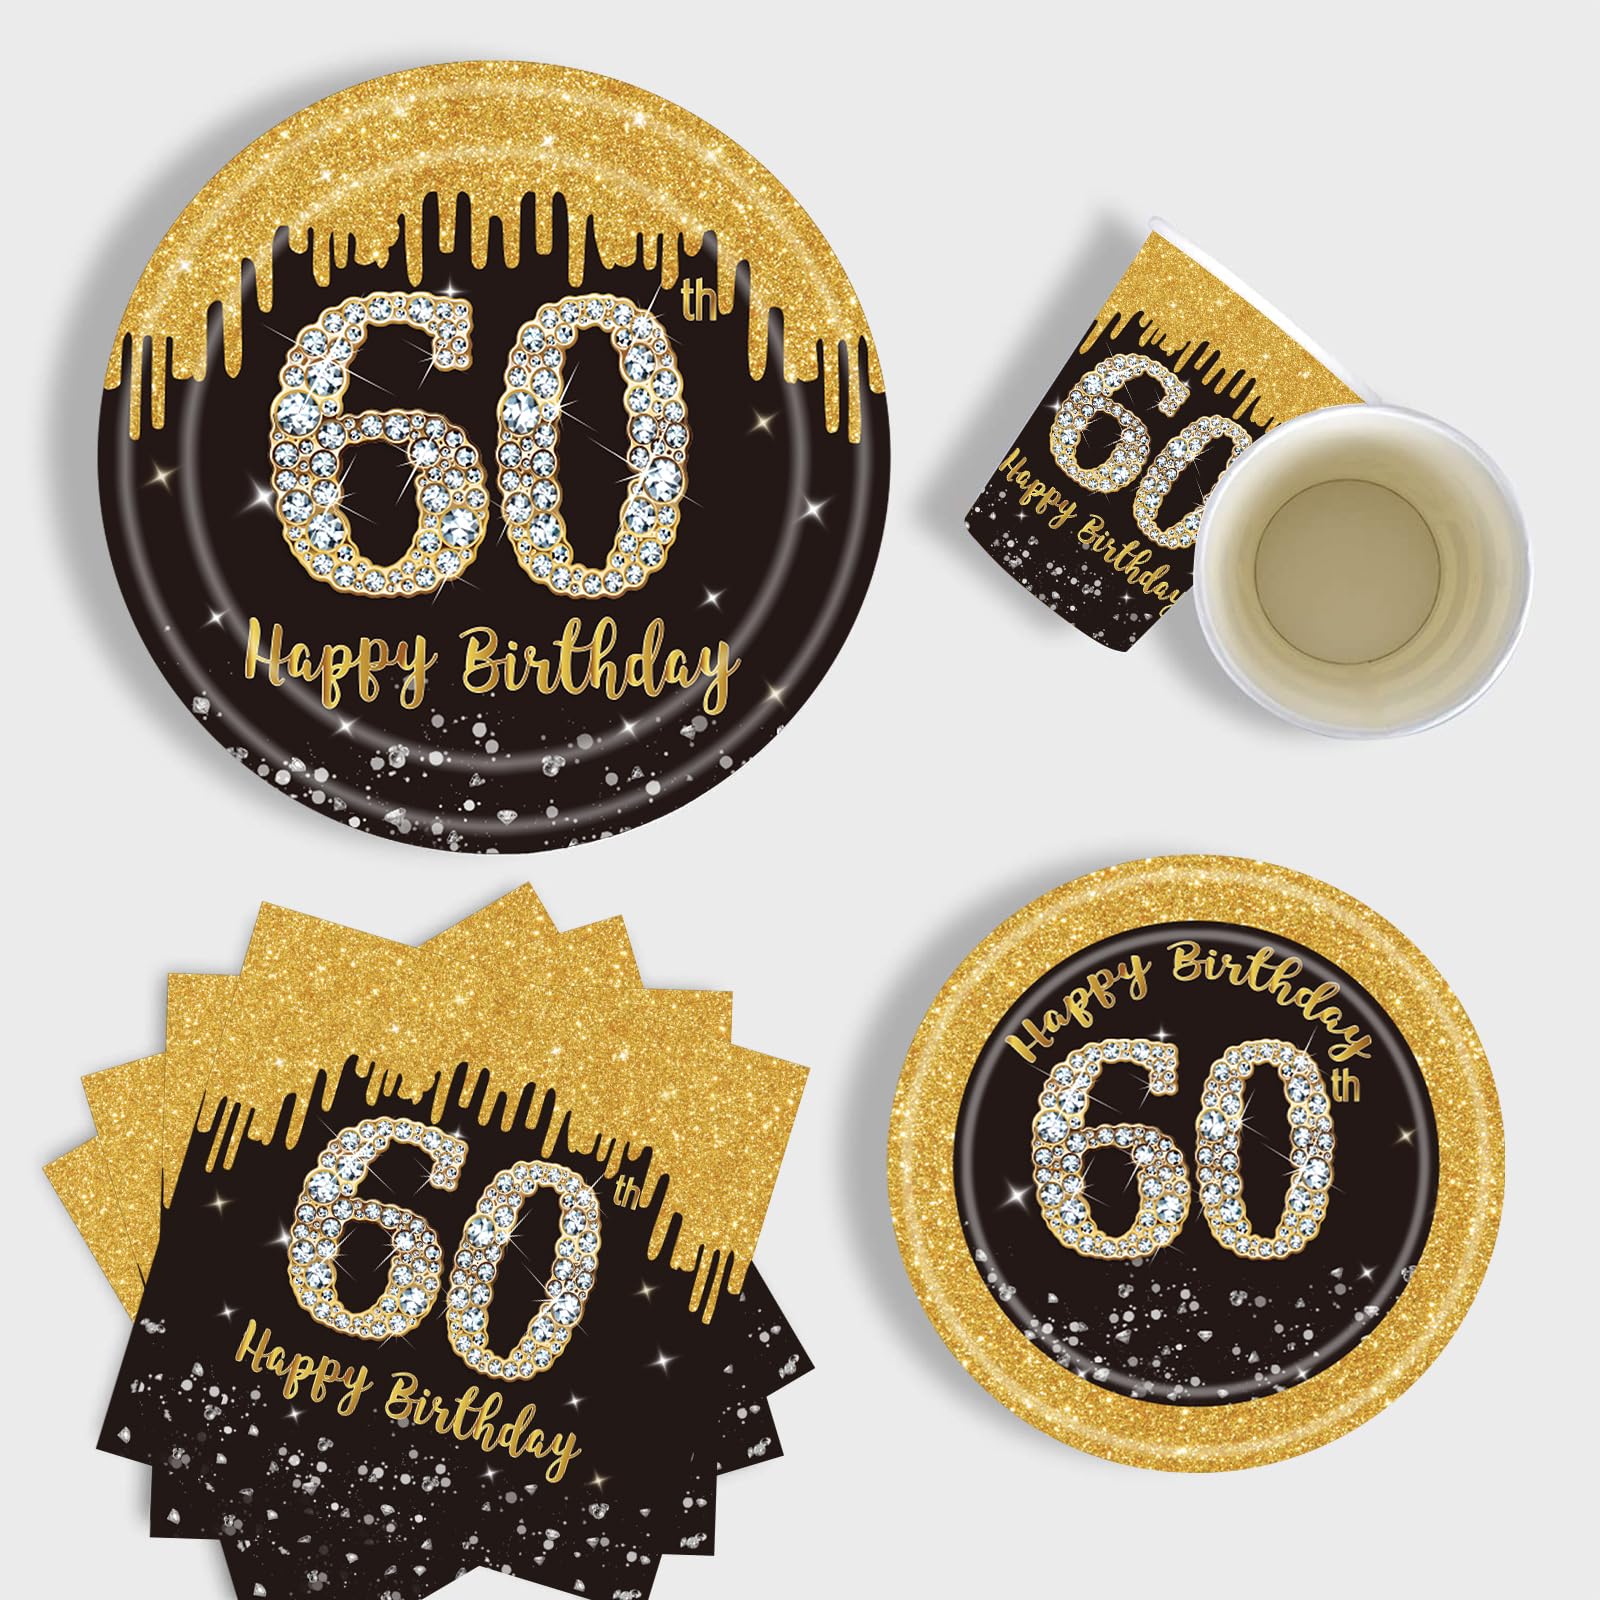 16Pcs 60th Birthday Black Gold Paper Plates 7 inch,60th Black Gold Birthday Disposable Party Paper Plates,Happy 60th Birthday Tableware Decorations for Her,Him,Men,Women,Birthday Gifts Party Supplies